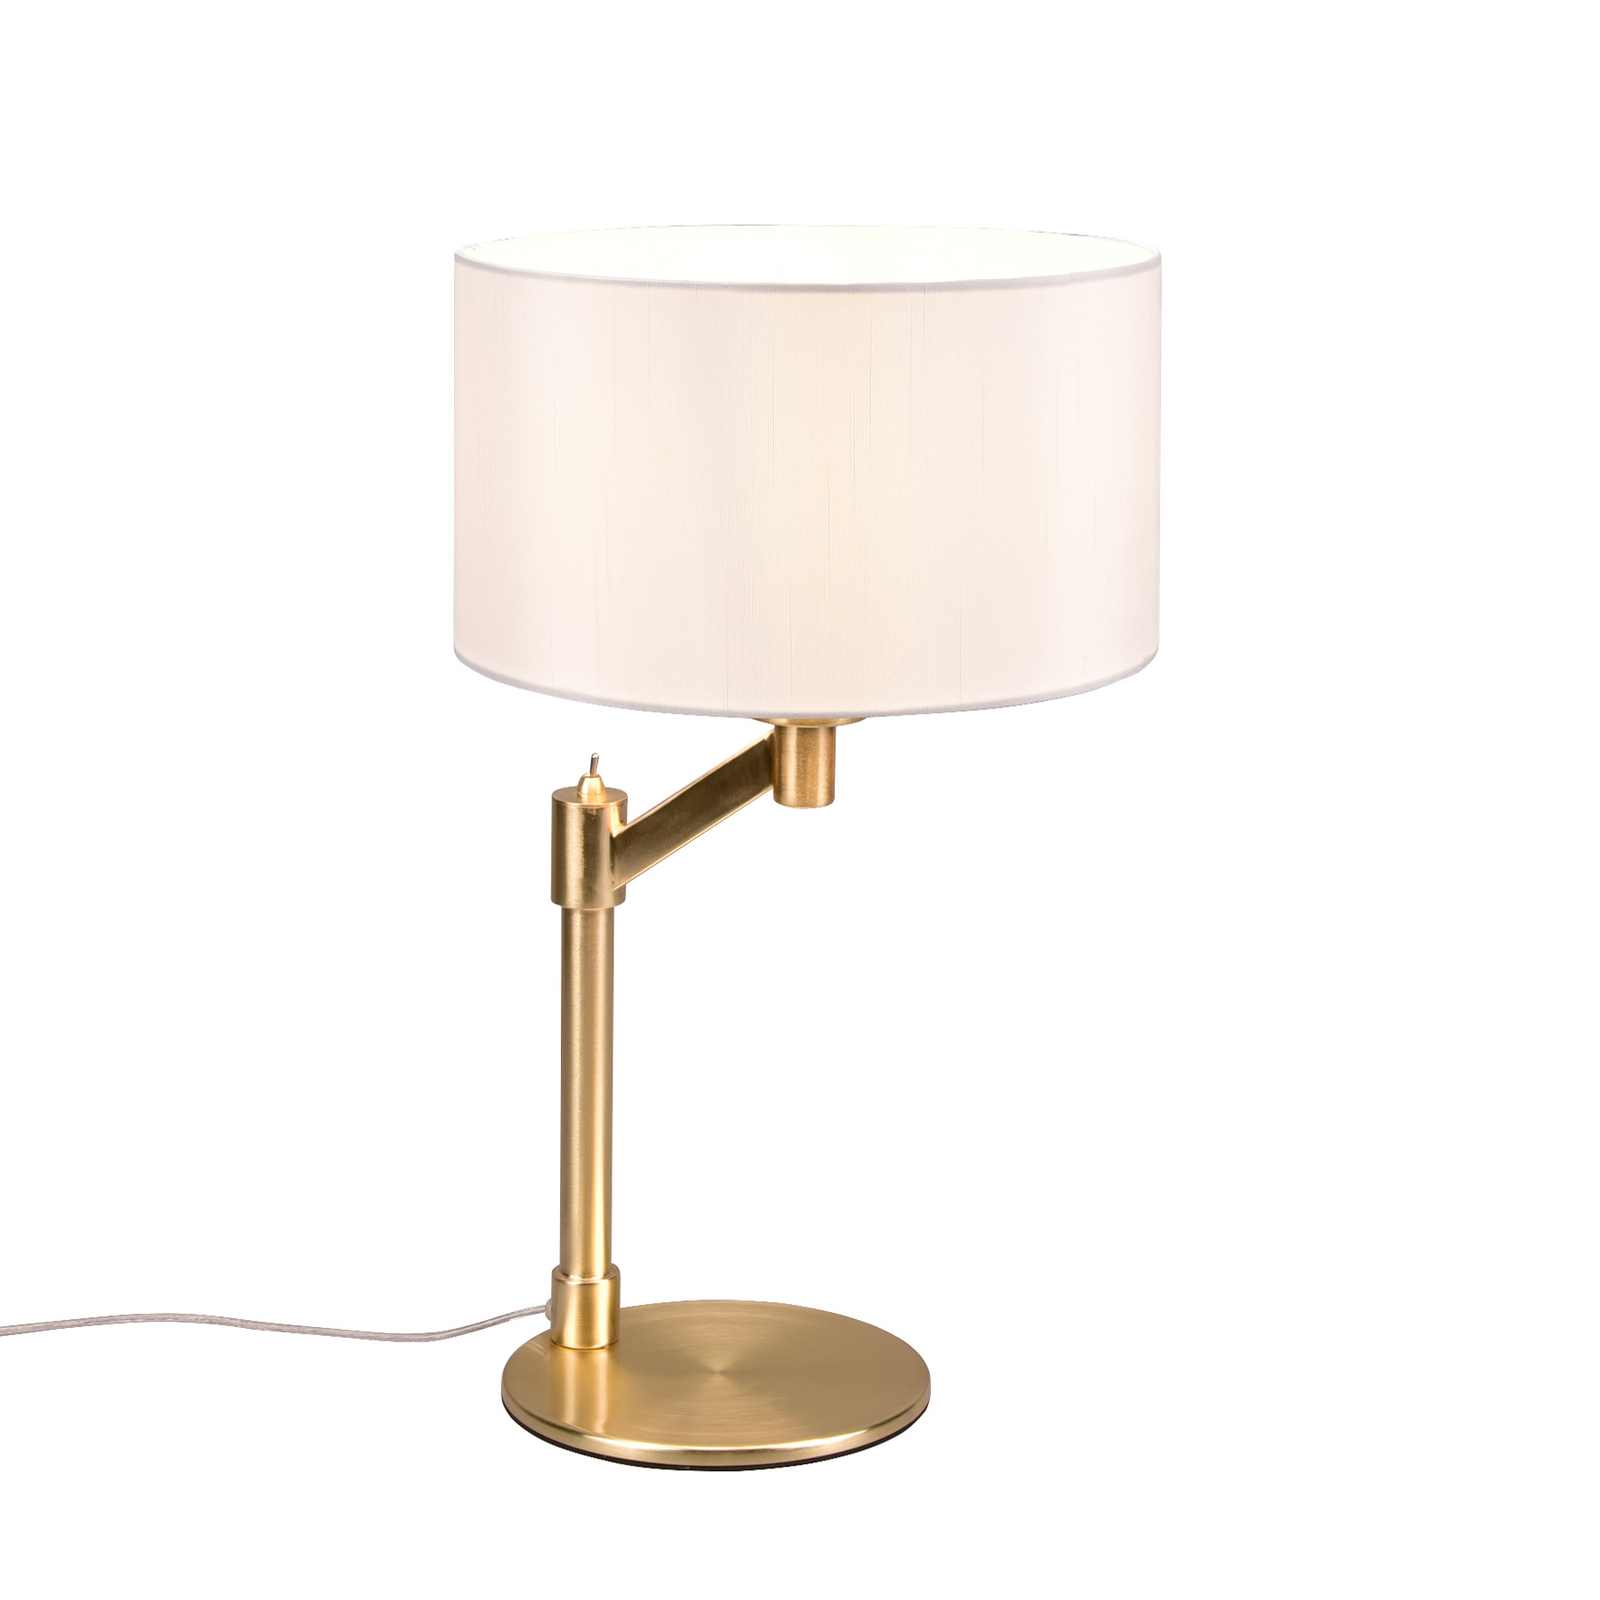 Cassio table lamp with fabric shade, brass